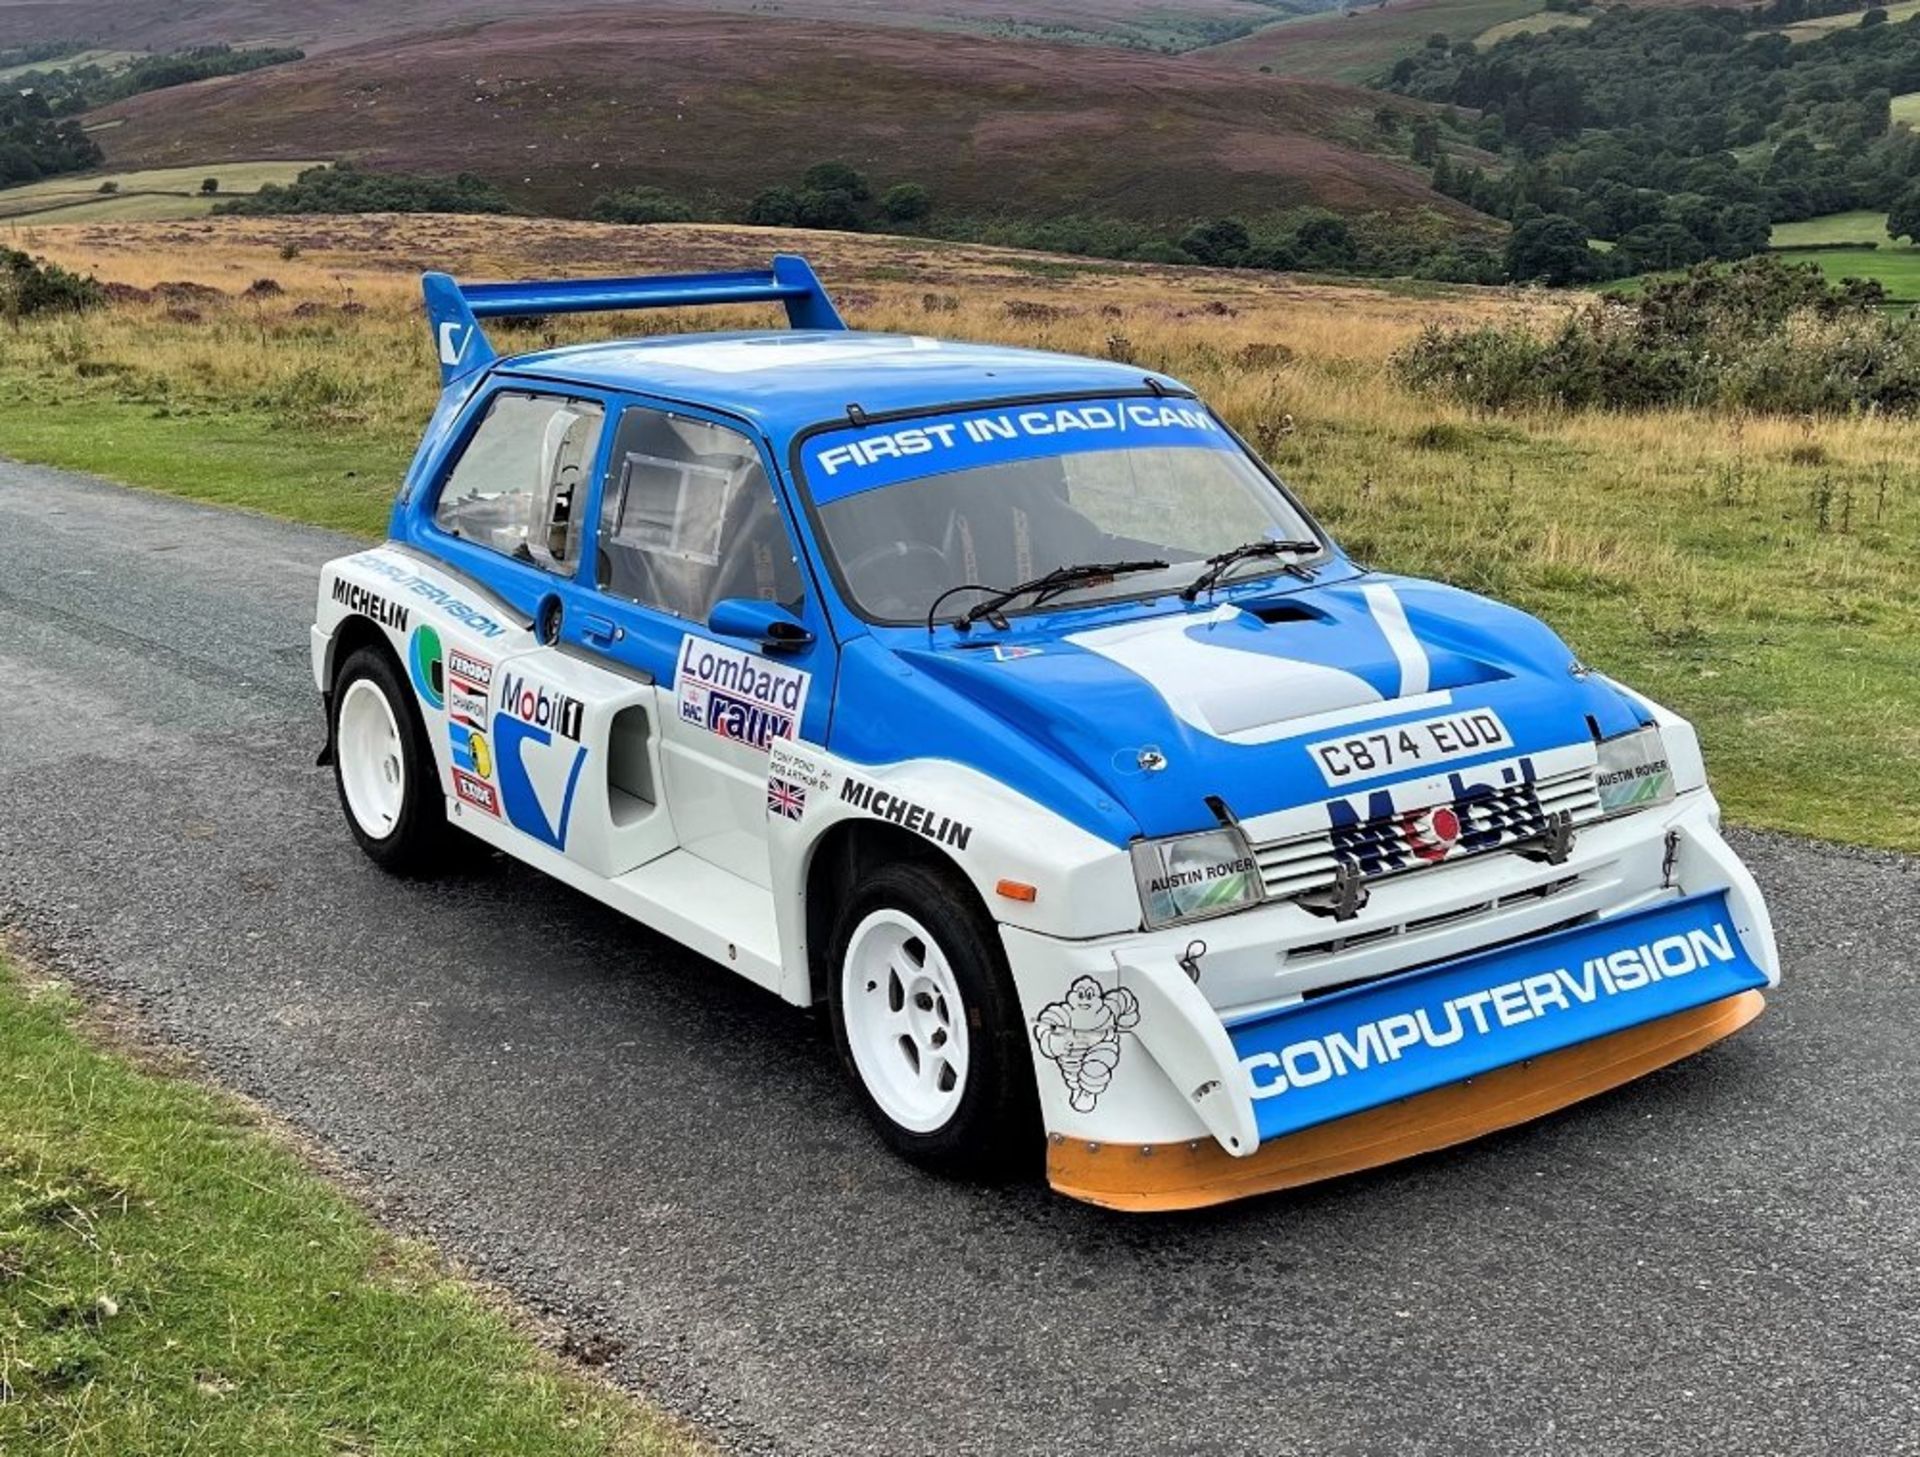 1985 MG Metro 6R4 Works Rally Car Registration Number: C874 EUD Chassis Number: #134  The MG Metro